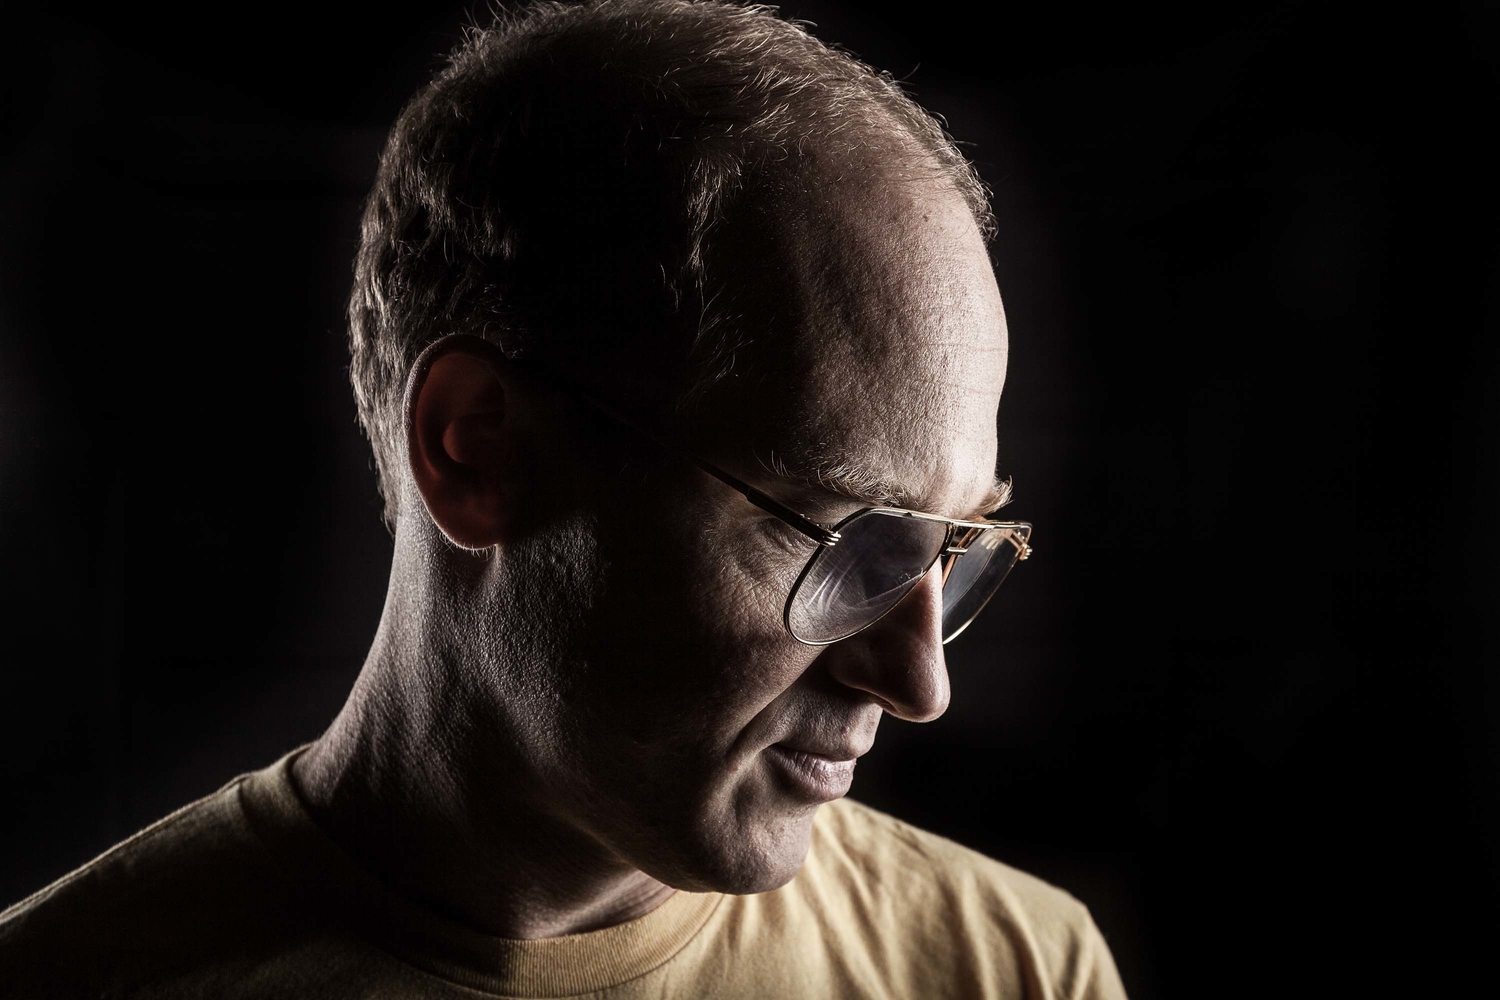 Dan Snaith shares new music as Daphni, in the shape of shimmering new ‘Sizzling’ EP